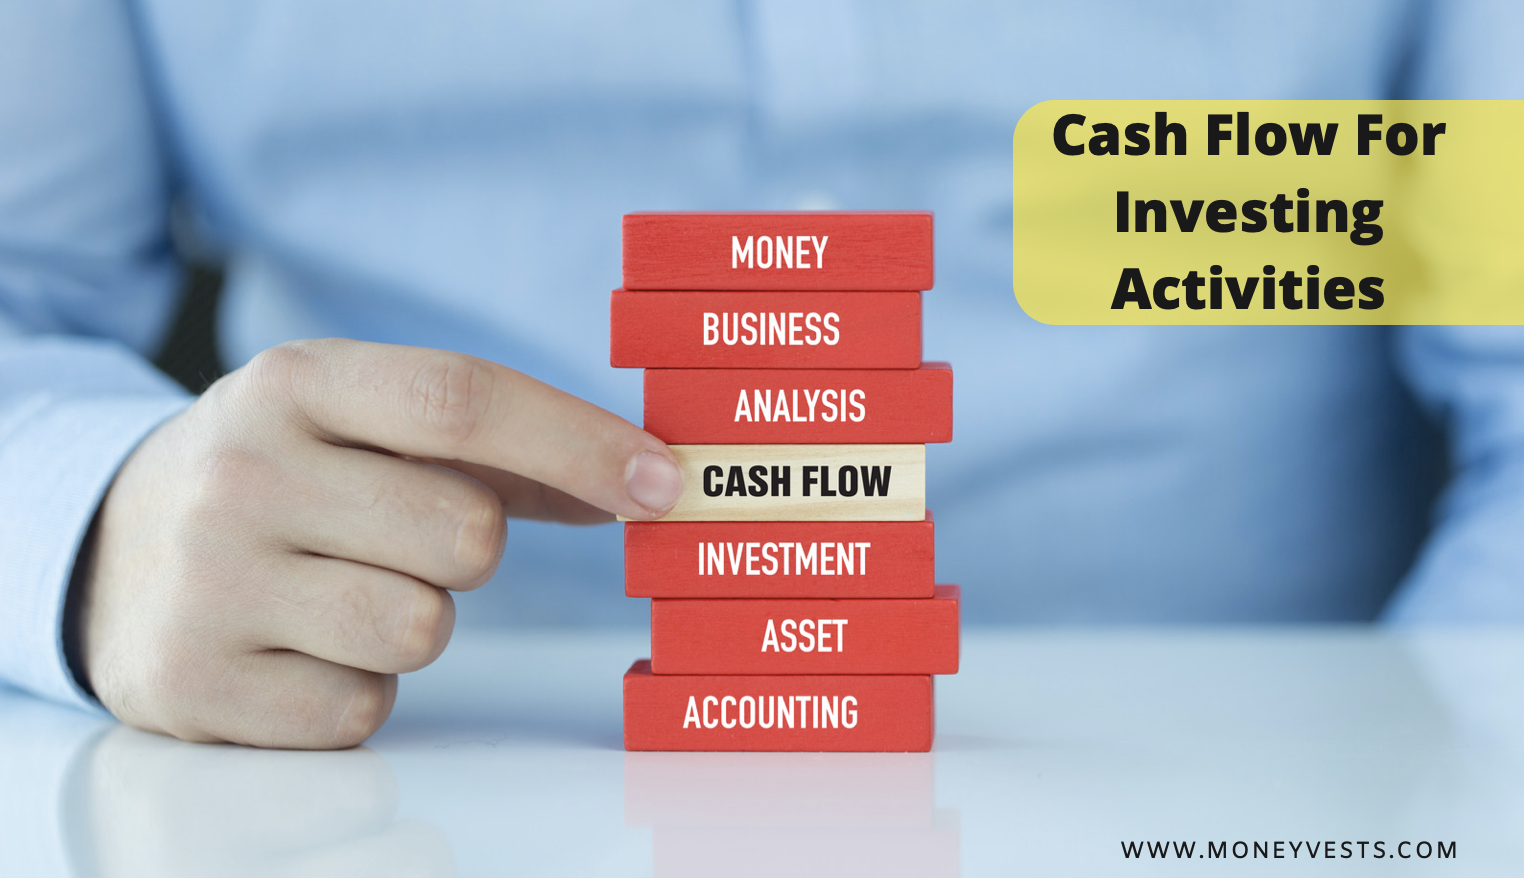 Cash Flow For Investing Activities